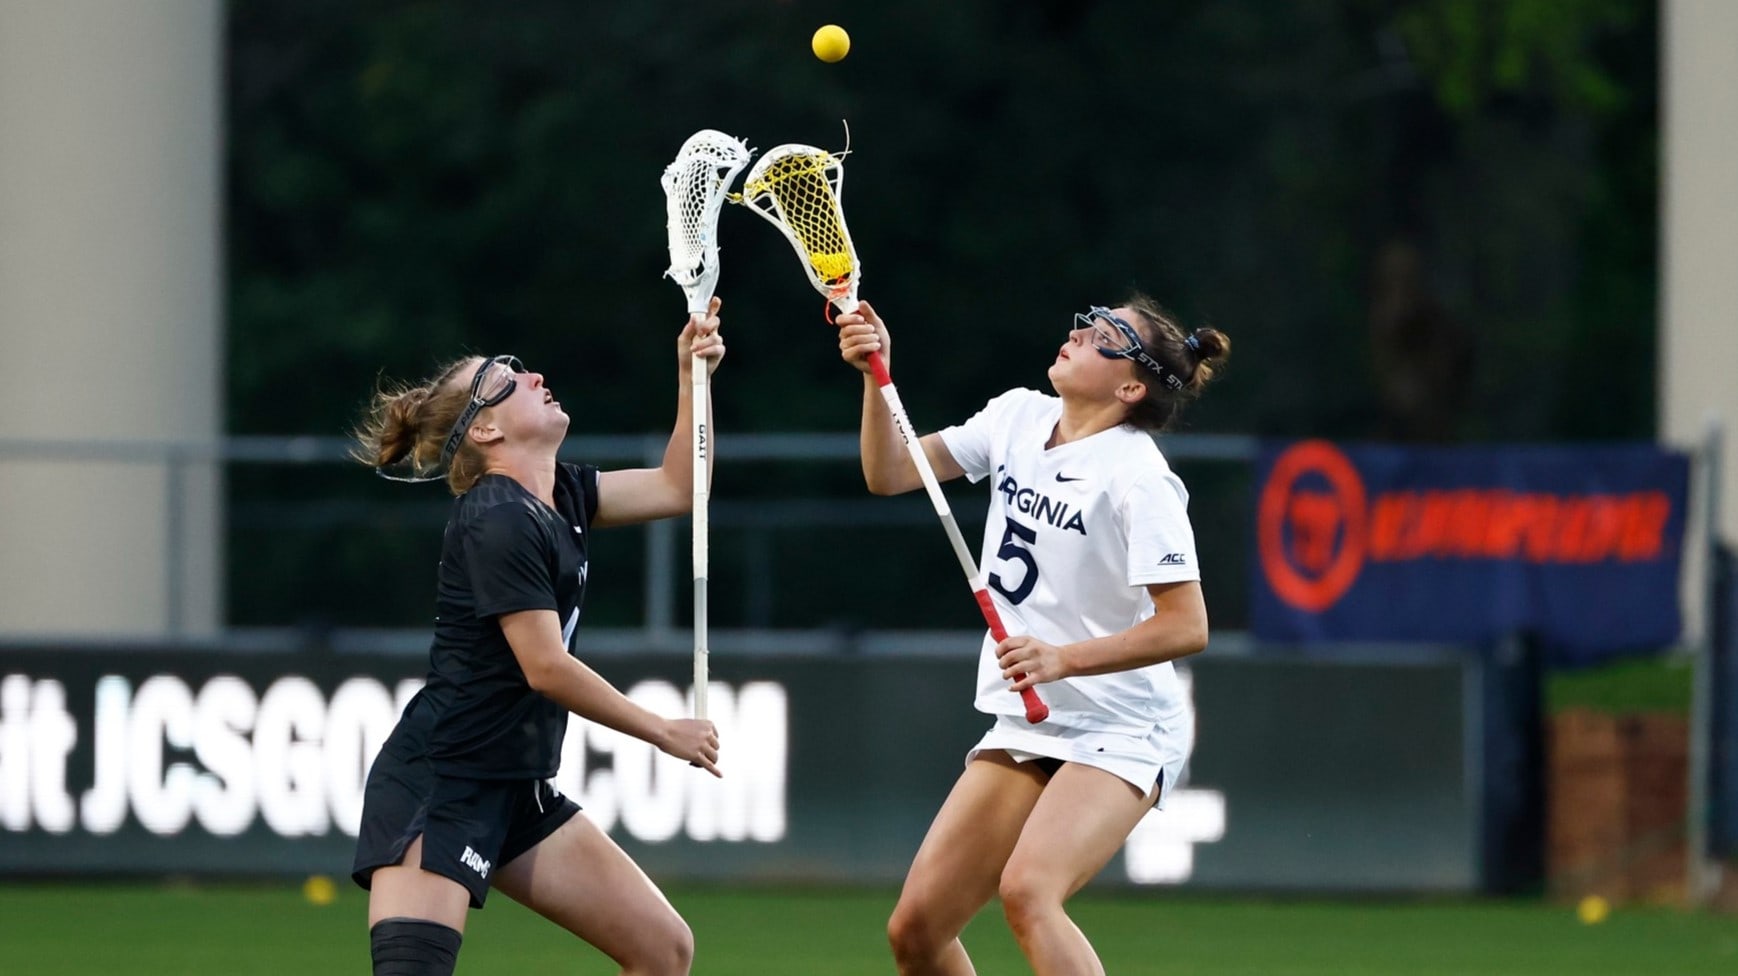 Kate Galica wins a draw control during the Virginia women's lacrosse game against VCU at Klockner Stadium.